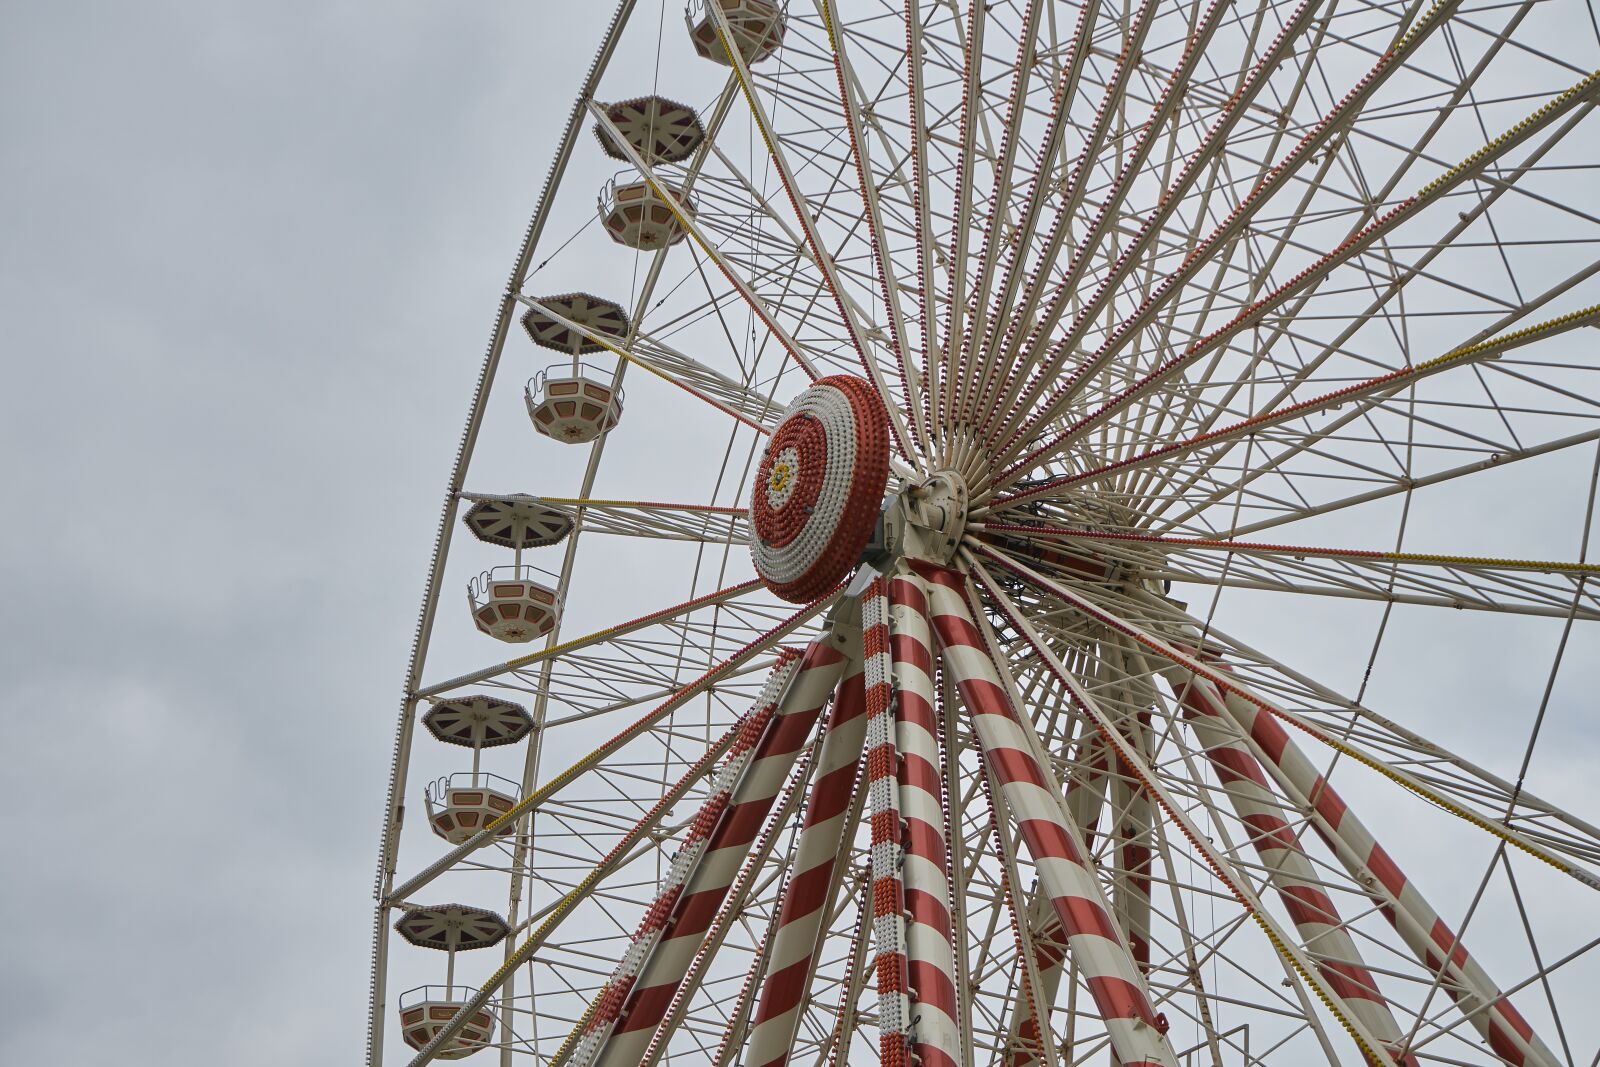 Sony a7 sample photo. Manege, ferris wheel, height photography